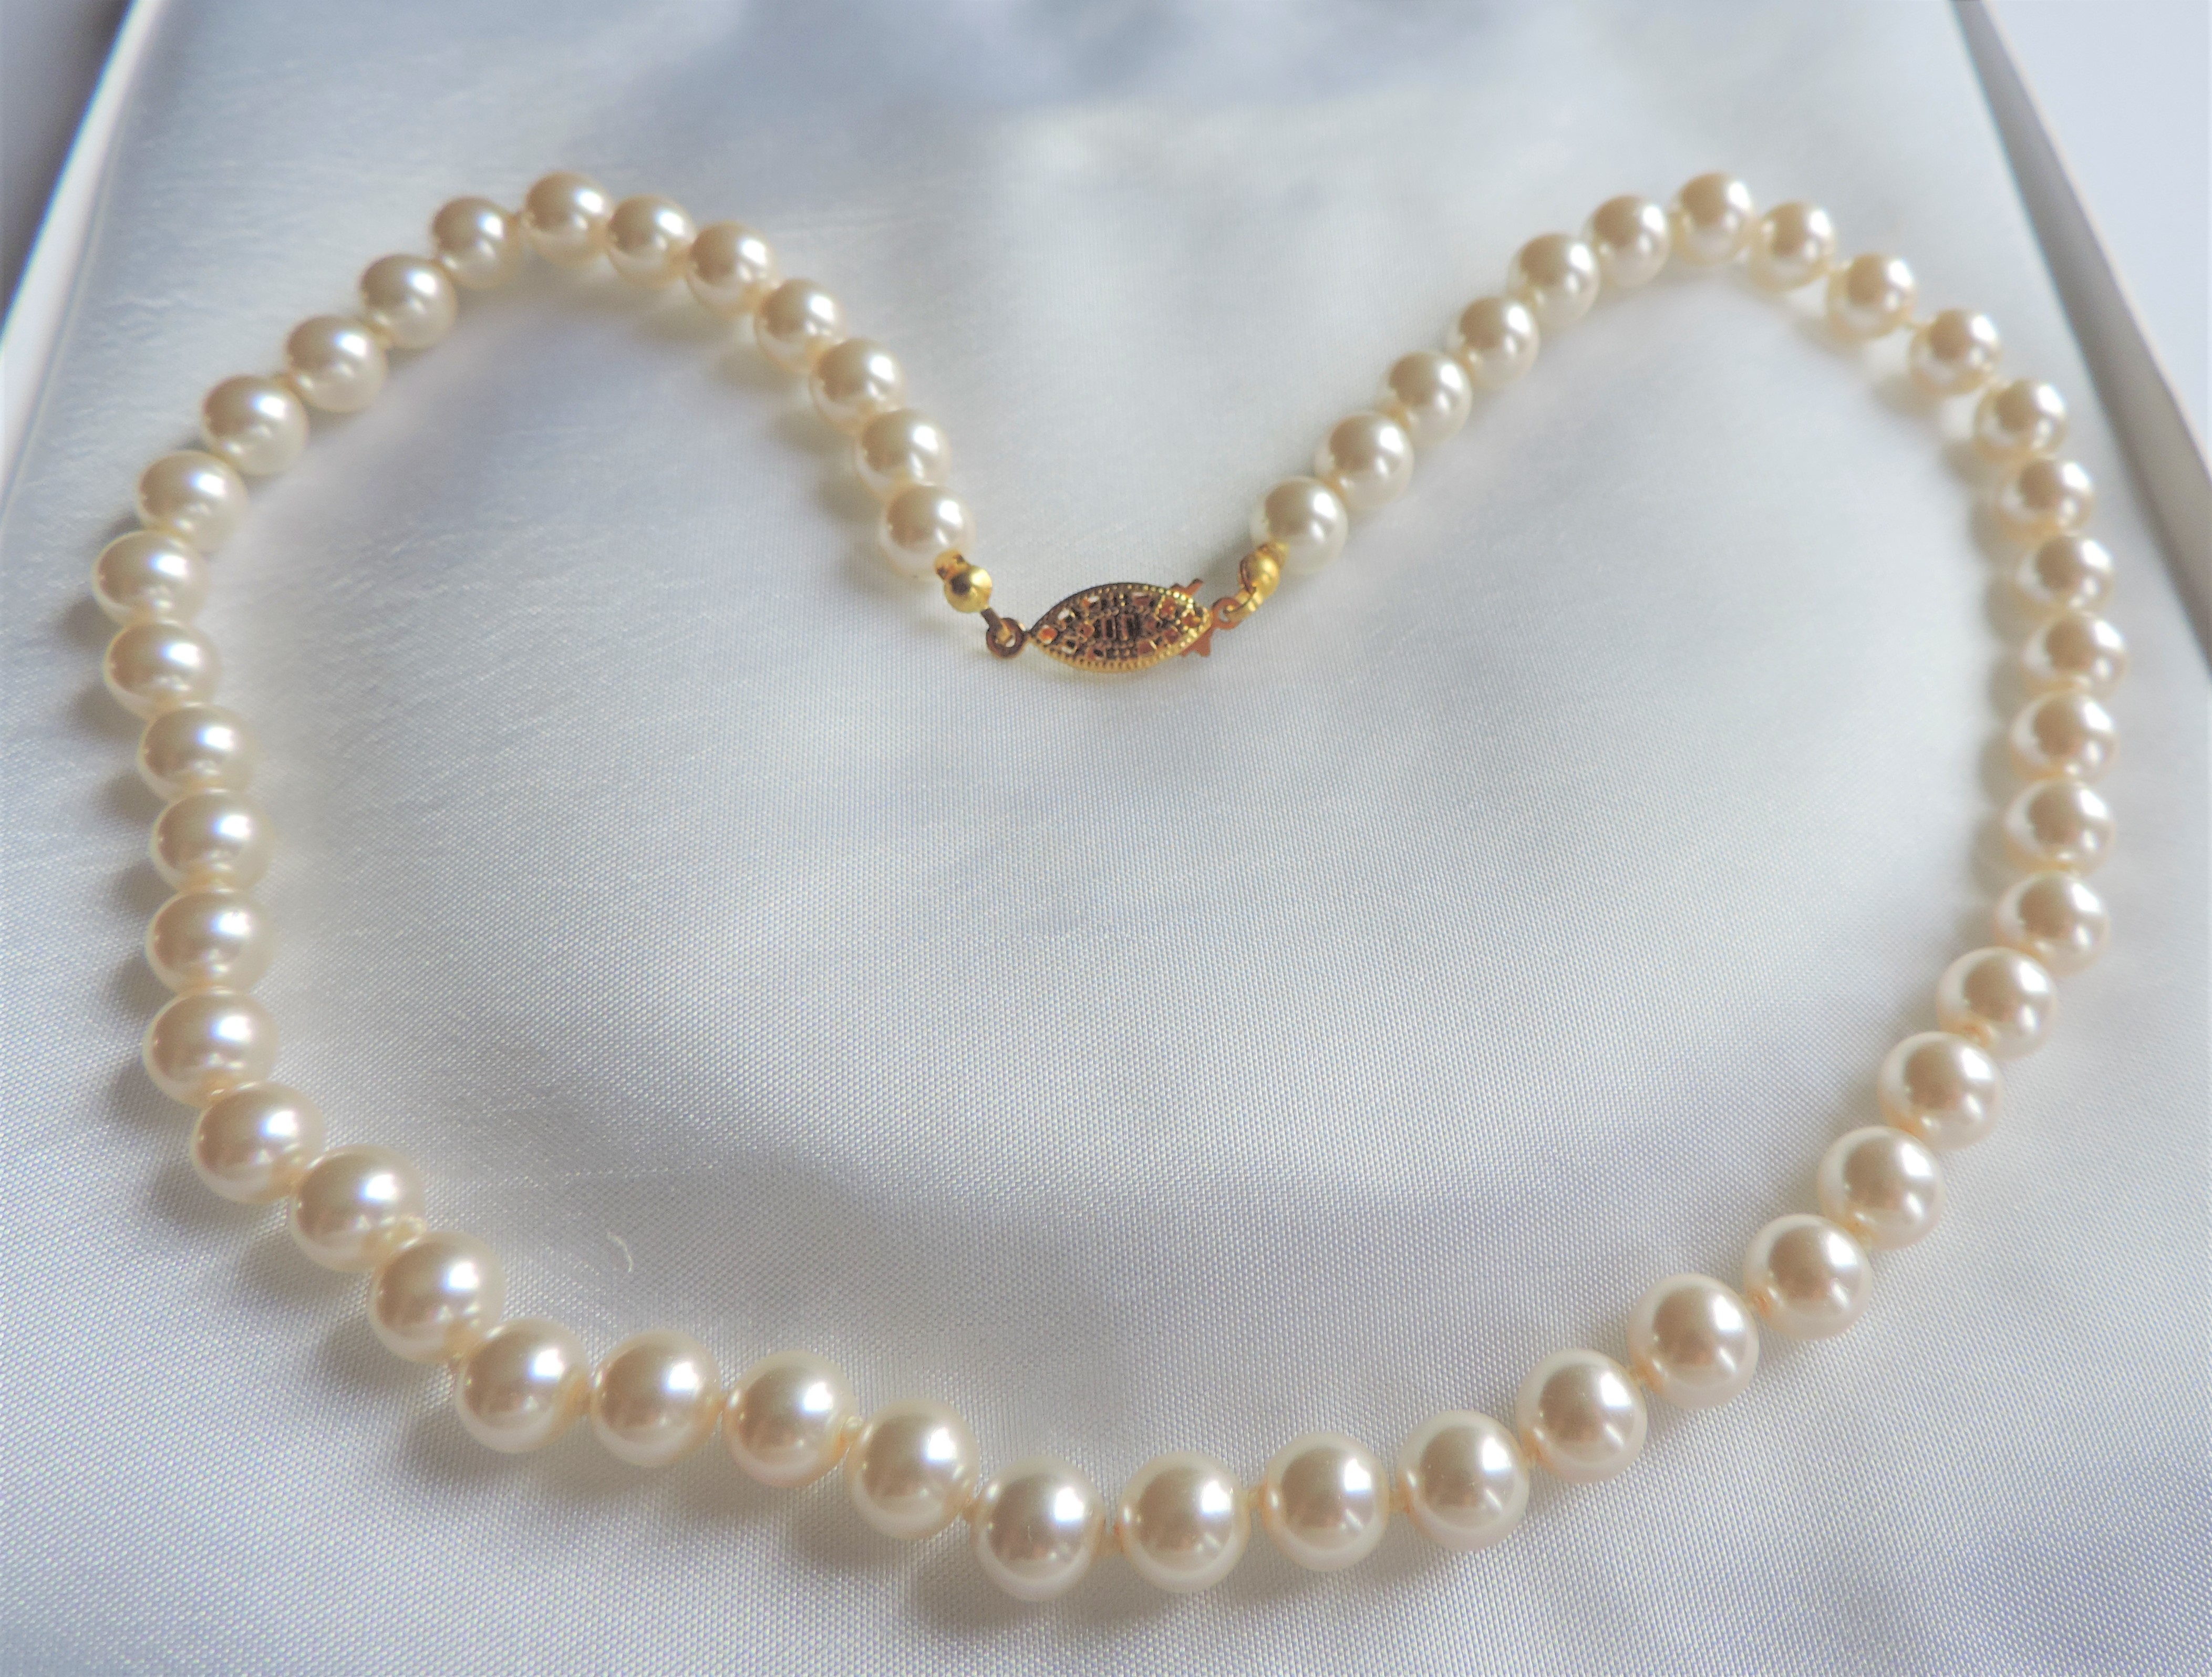 Single Strand 18 inch Pearl Necklace with Gift Pouch - Image 3 of 3